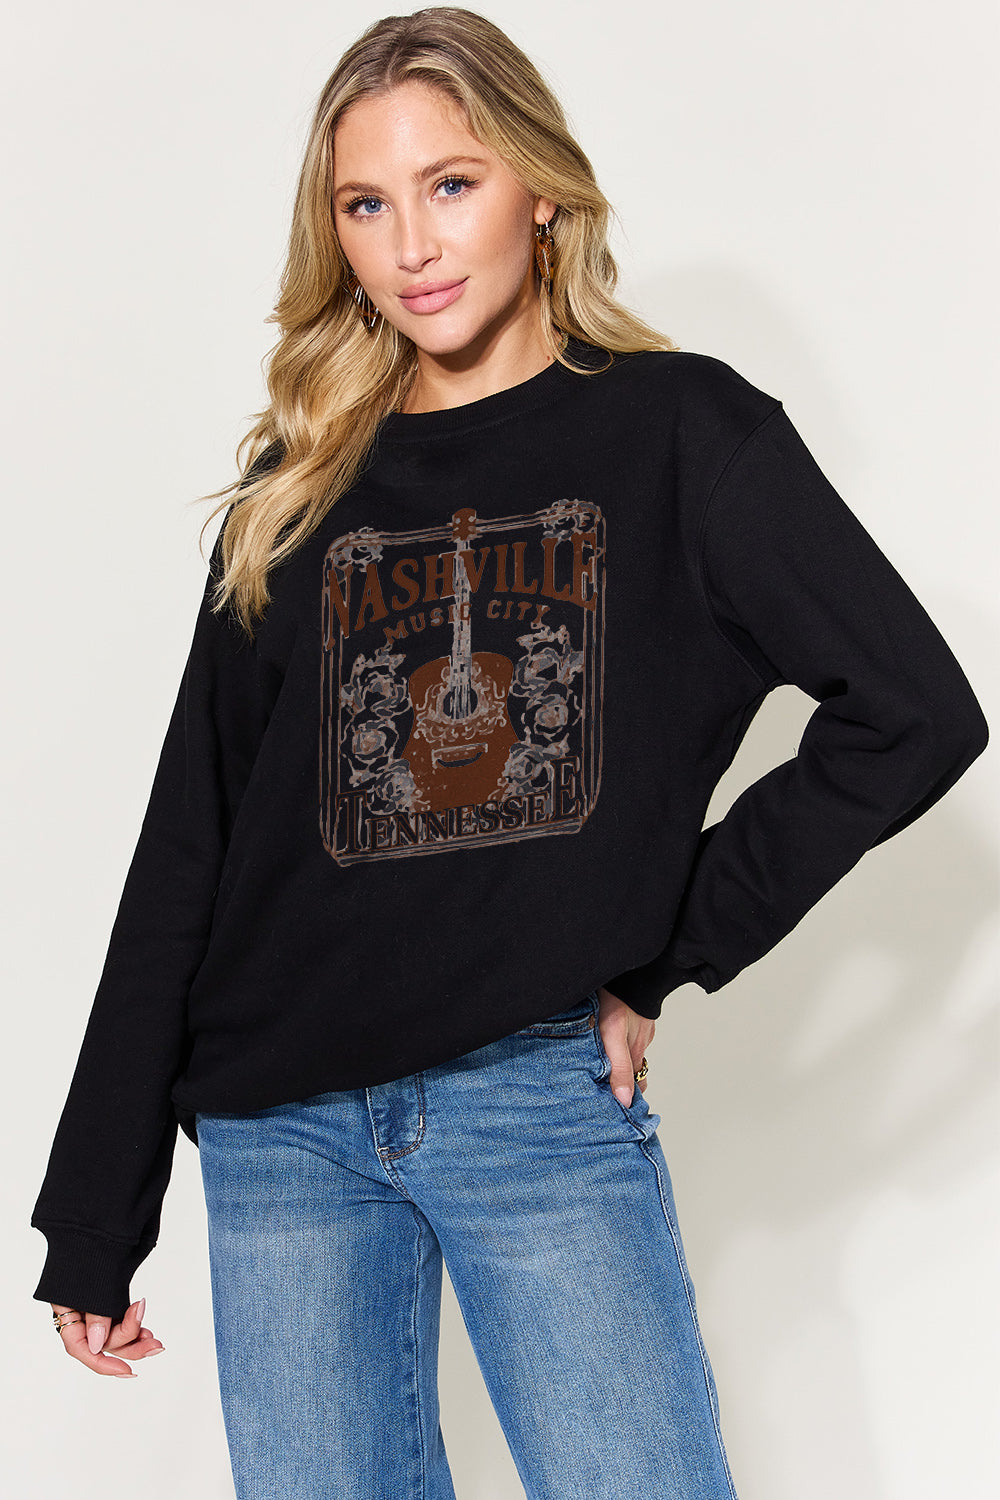 A woman models a heather gray 'Nashville Music City Tennessee' sweatshirt, displaying the vintage print design on the front, paired with blue jeans for a relaxed look.